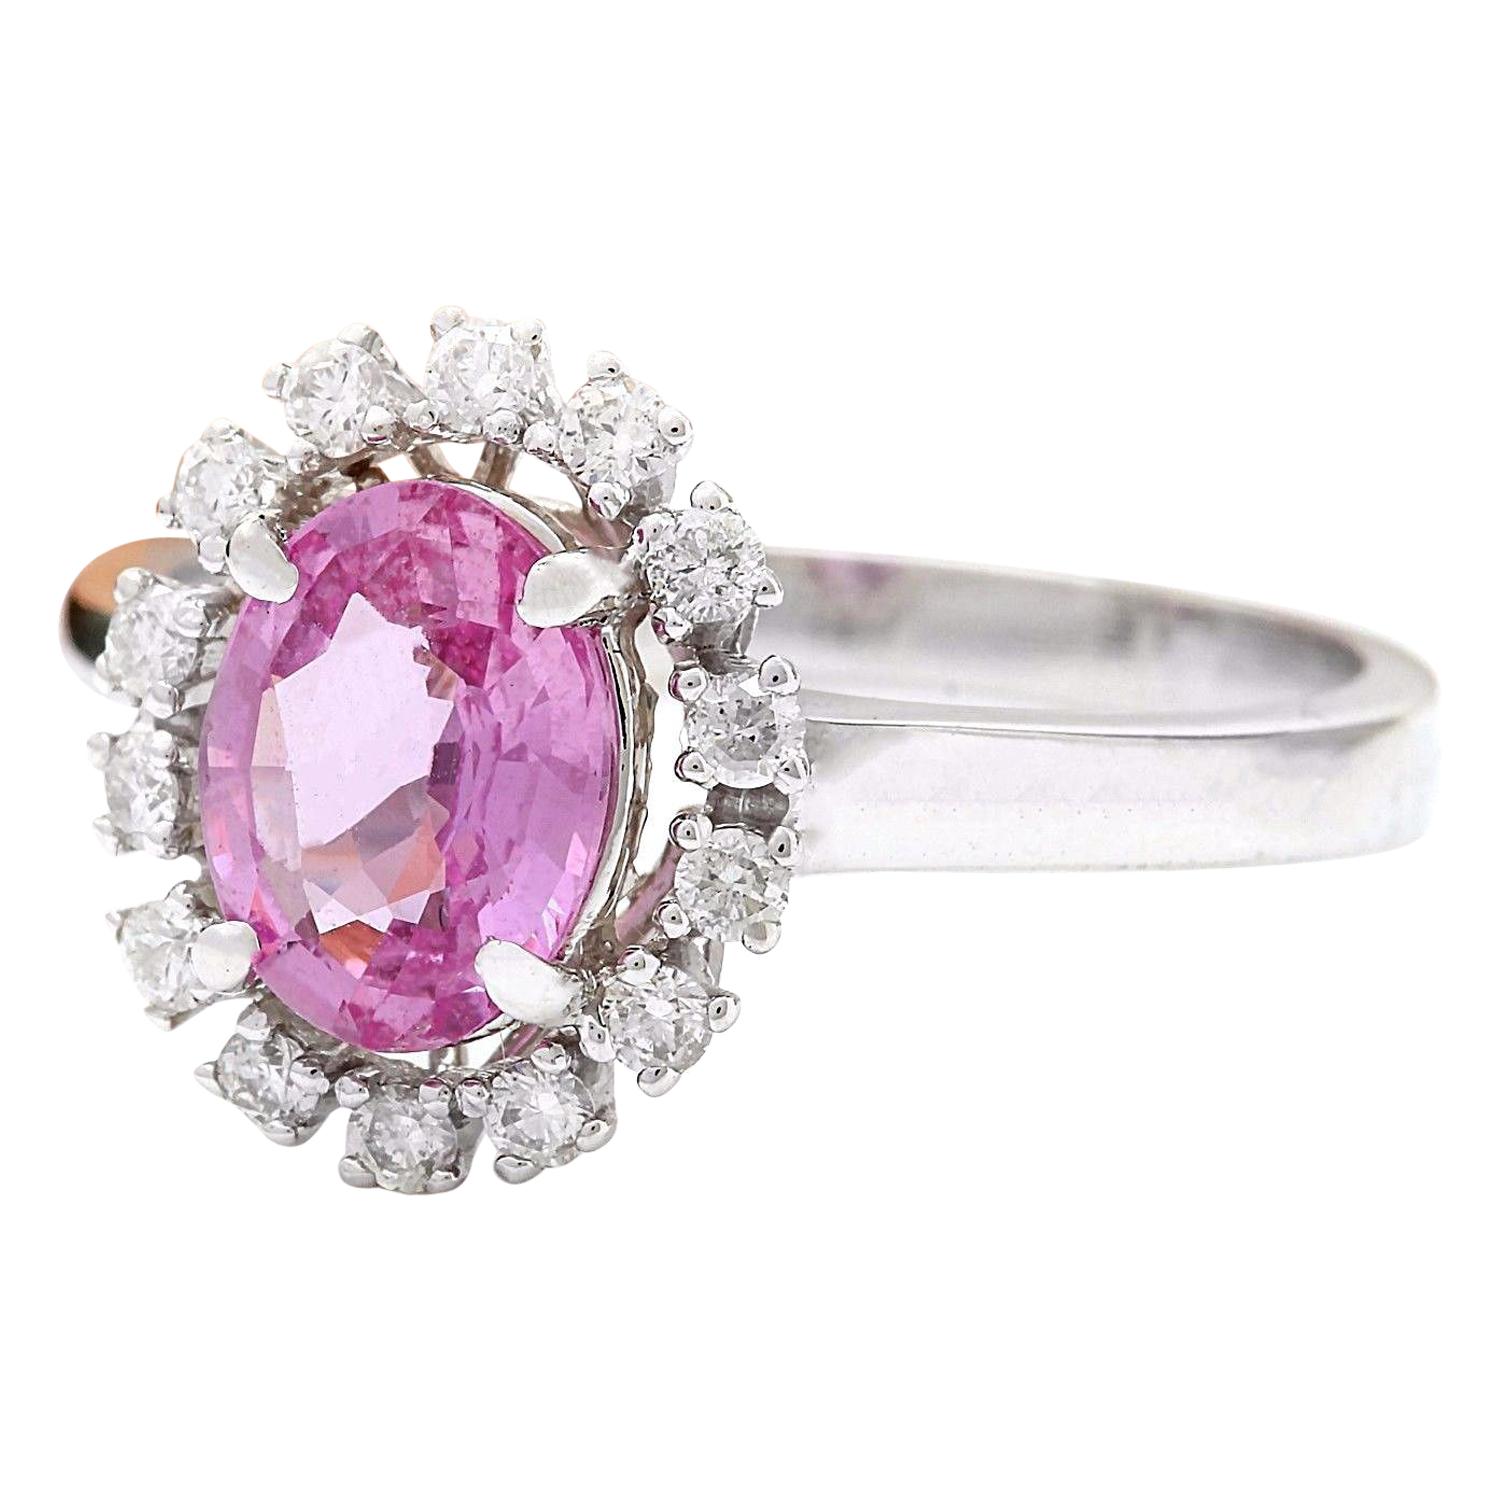 1.43 Carat Natural Sapphire 14K Solid White Gold Diamond Ring
 Item Type: Ring
 Item Style: Engagement
 Material: 14K White Gold
 Mainstone: Sapphire
 Stone Color: Pink
 Stone Weight: 1.23 Carat
 Stone Shape: Oval
 Stone Quantity: 1
 Stone